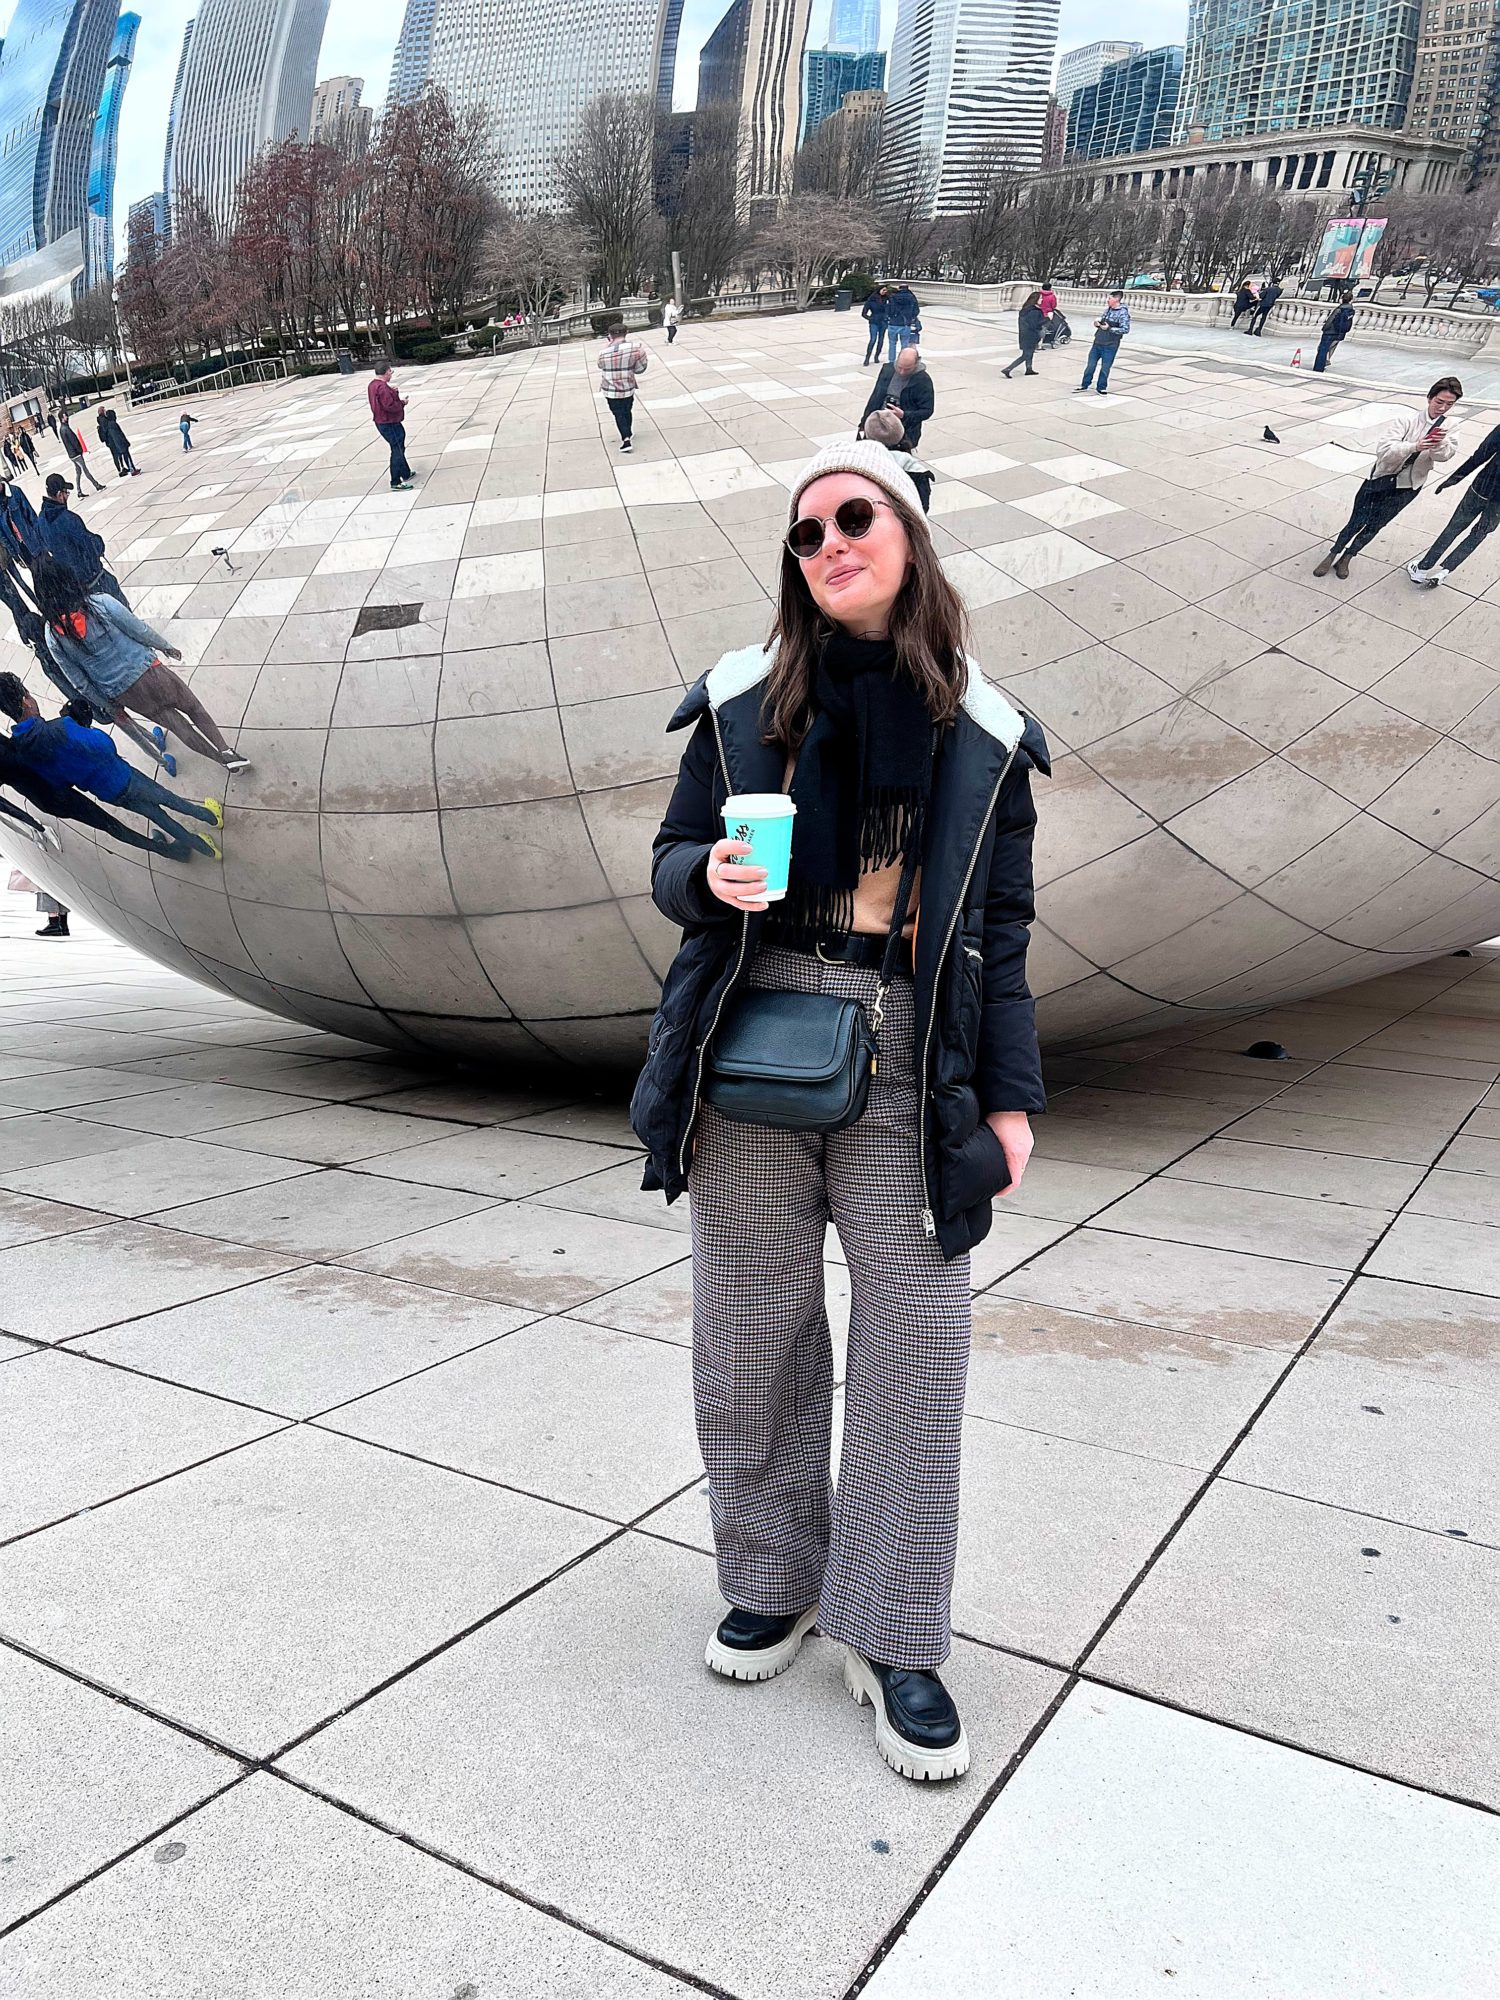 Alyssa wears wool pants and a camel sweater with a big coat in front of The Bean